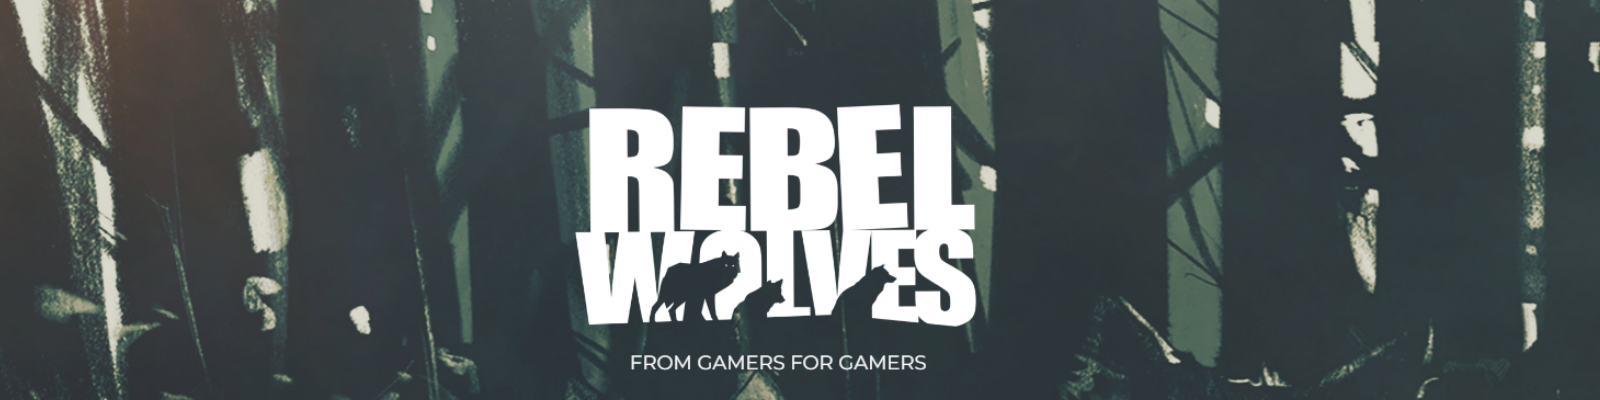 New 'Rebel Wolves' Studio Aims to Change RPGs | Alienware Arena